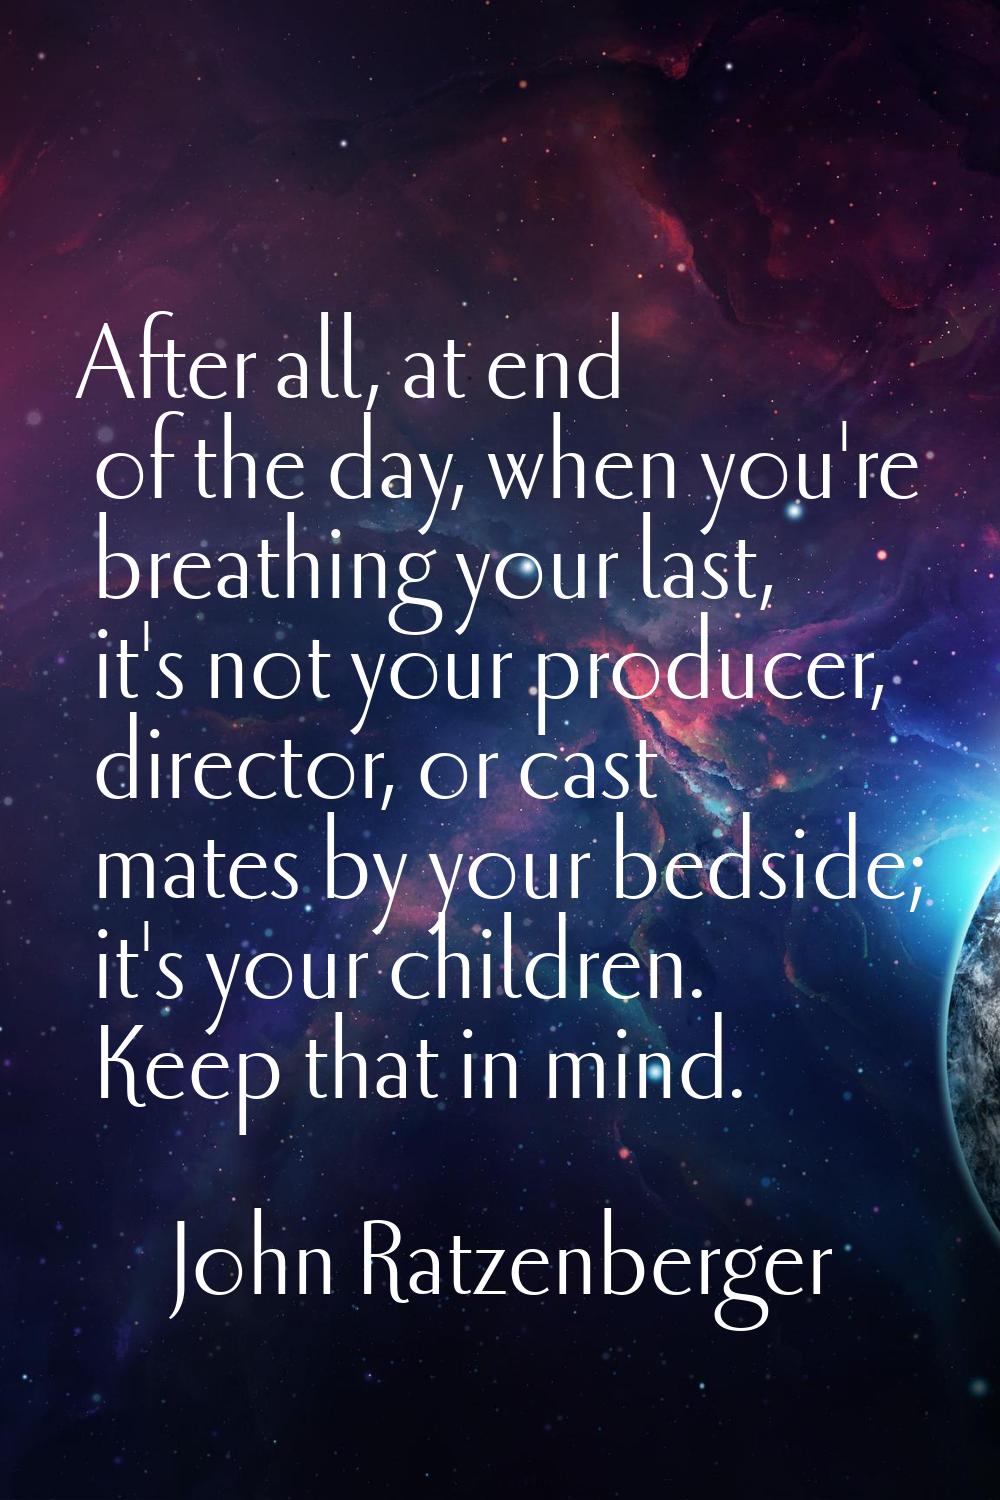 After all, at end of the day, when you're breathing your last, it's not your producer, director, or